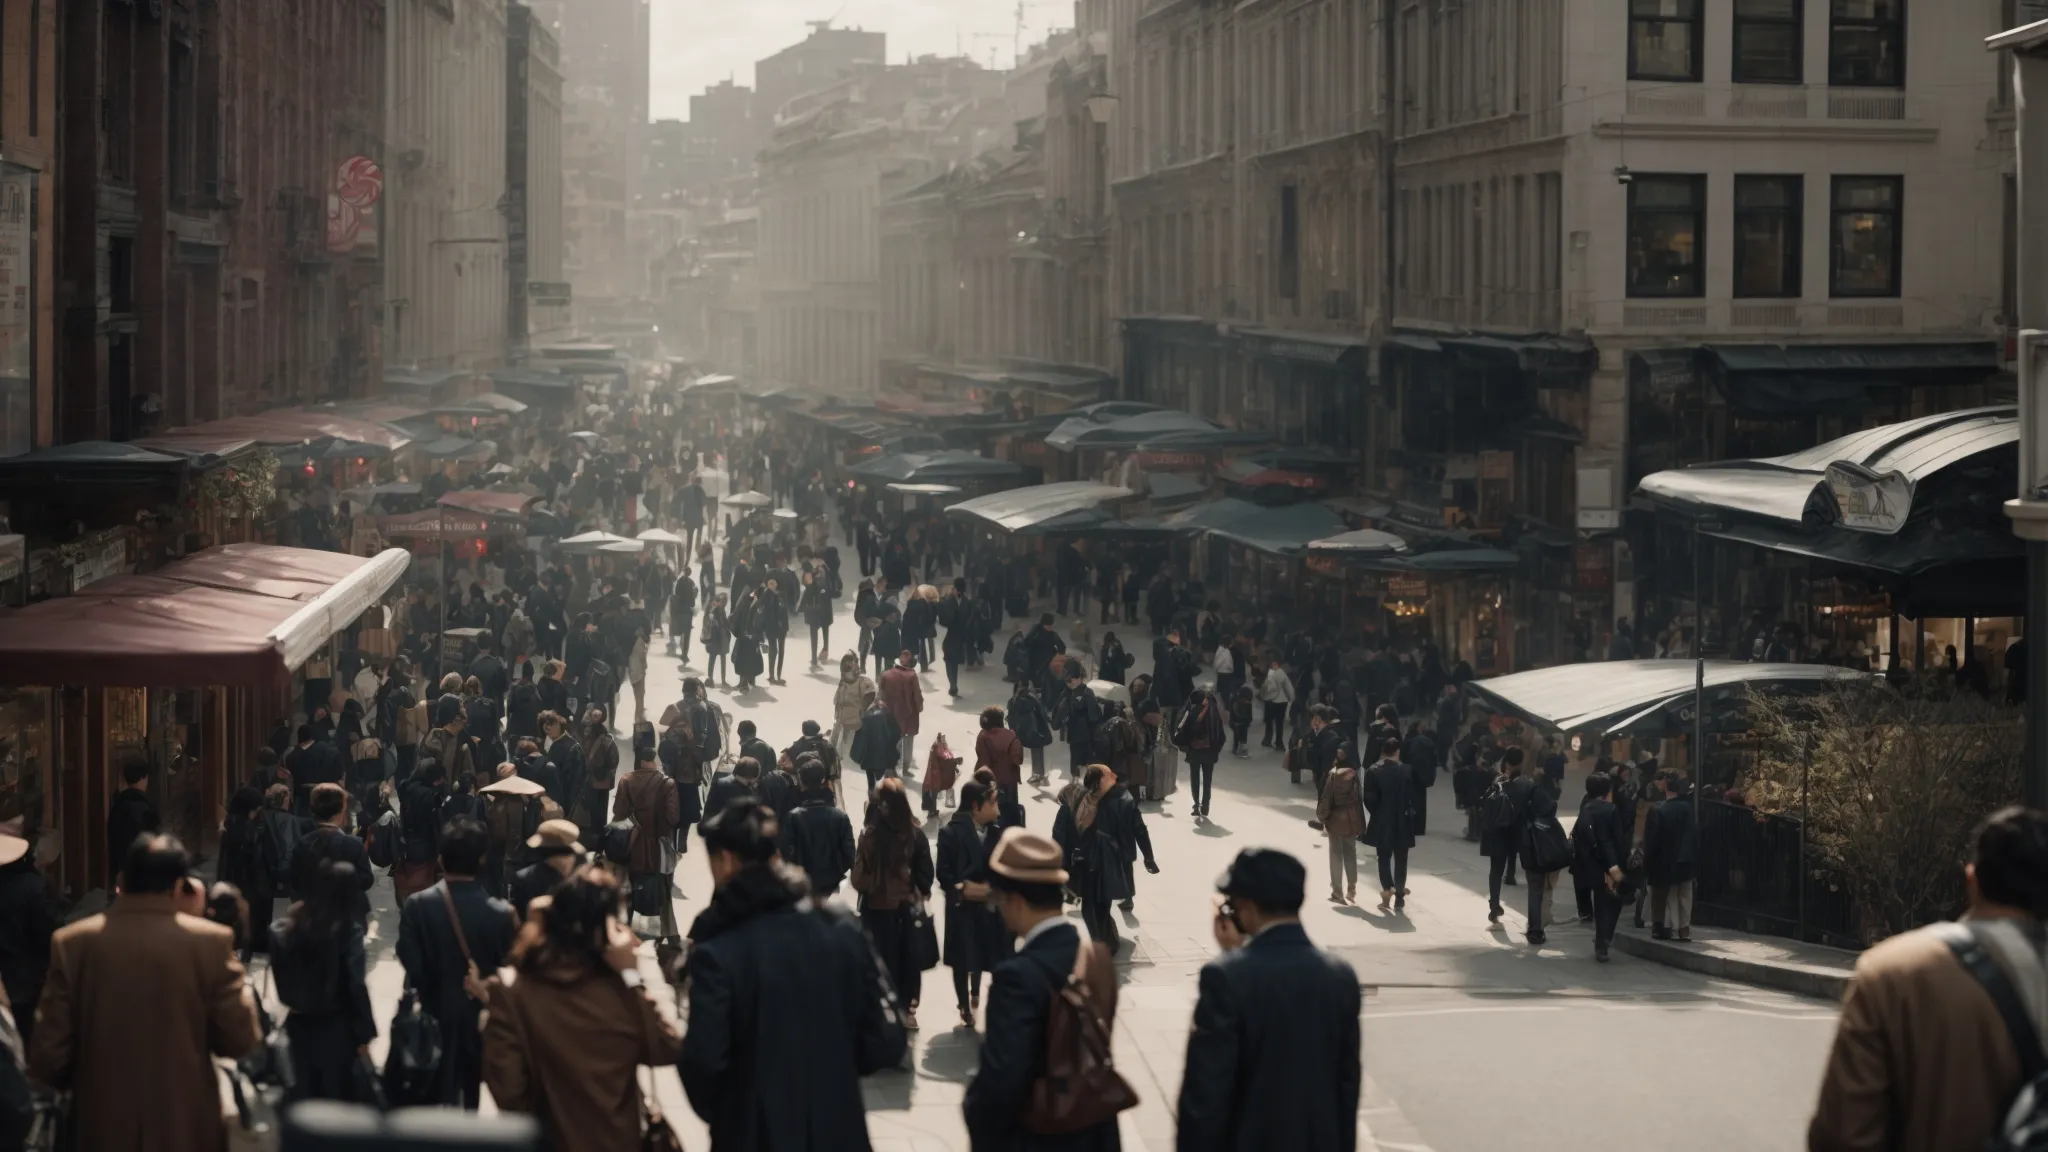 a bustling cityscape with people intently using their smartphones while walking.